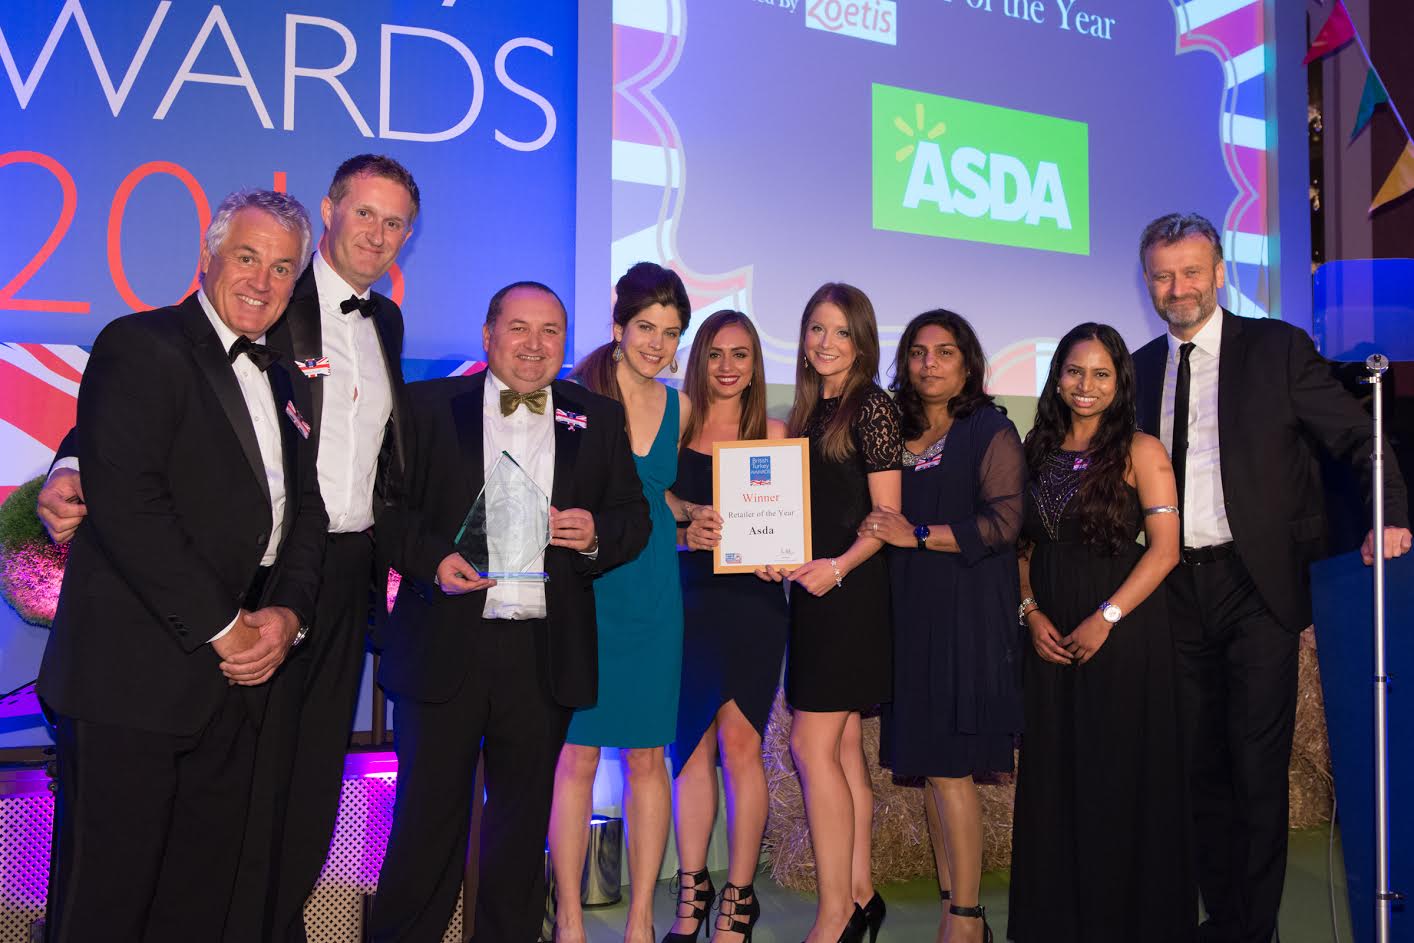 Asda wins British Turkey Retailer of the Year - and the evening also raised more than £5,000 for the children’s medical charity Sparks